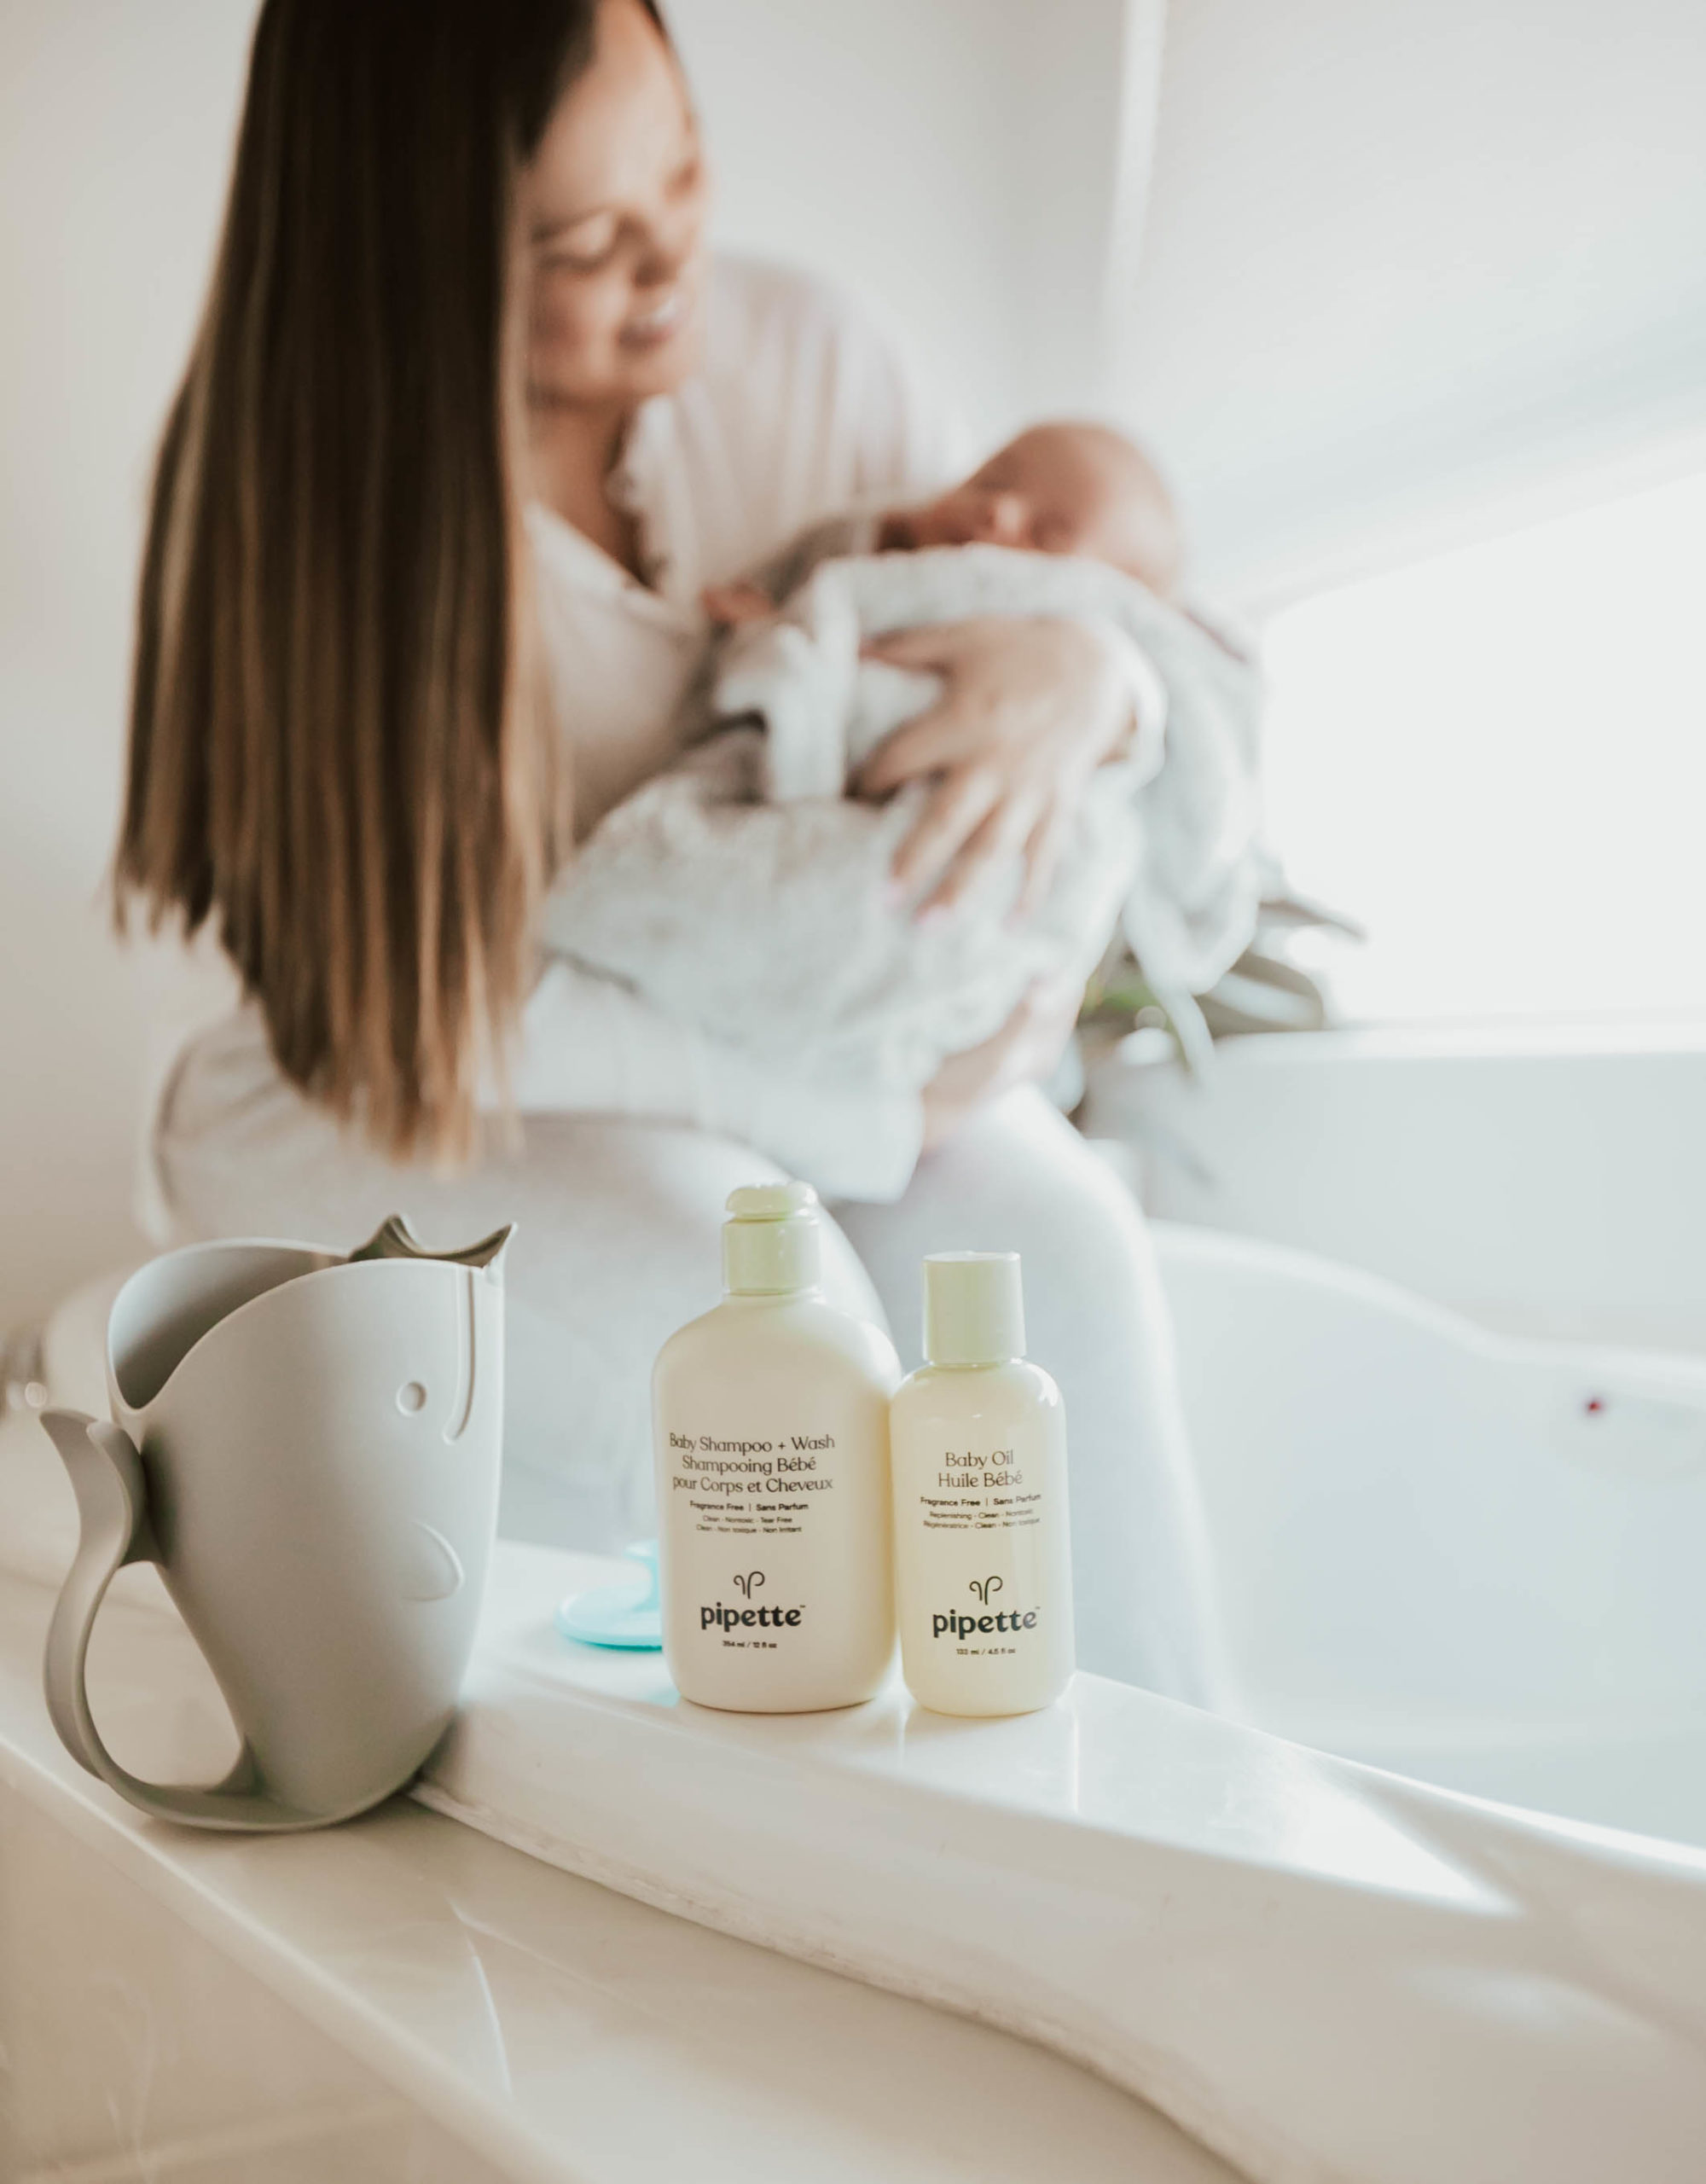 Reno blogger, Ashley Zeal, from Two Peas in a Prada shares all her favorite products she uses for bath time with baby Joe. 